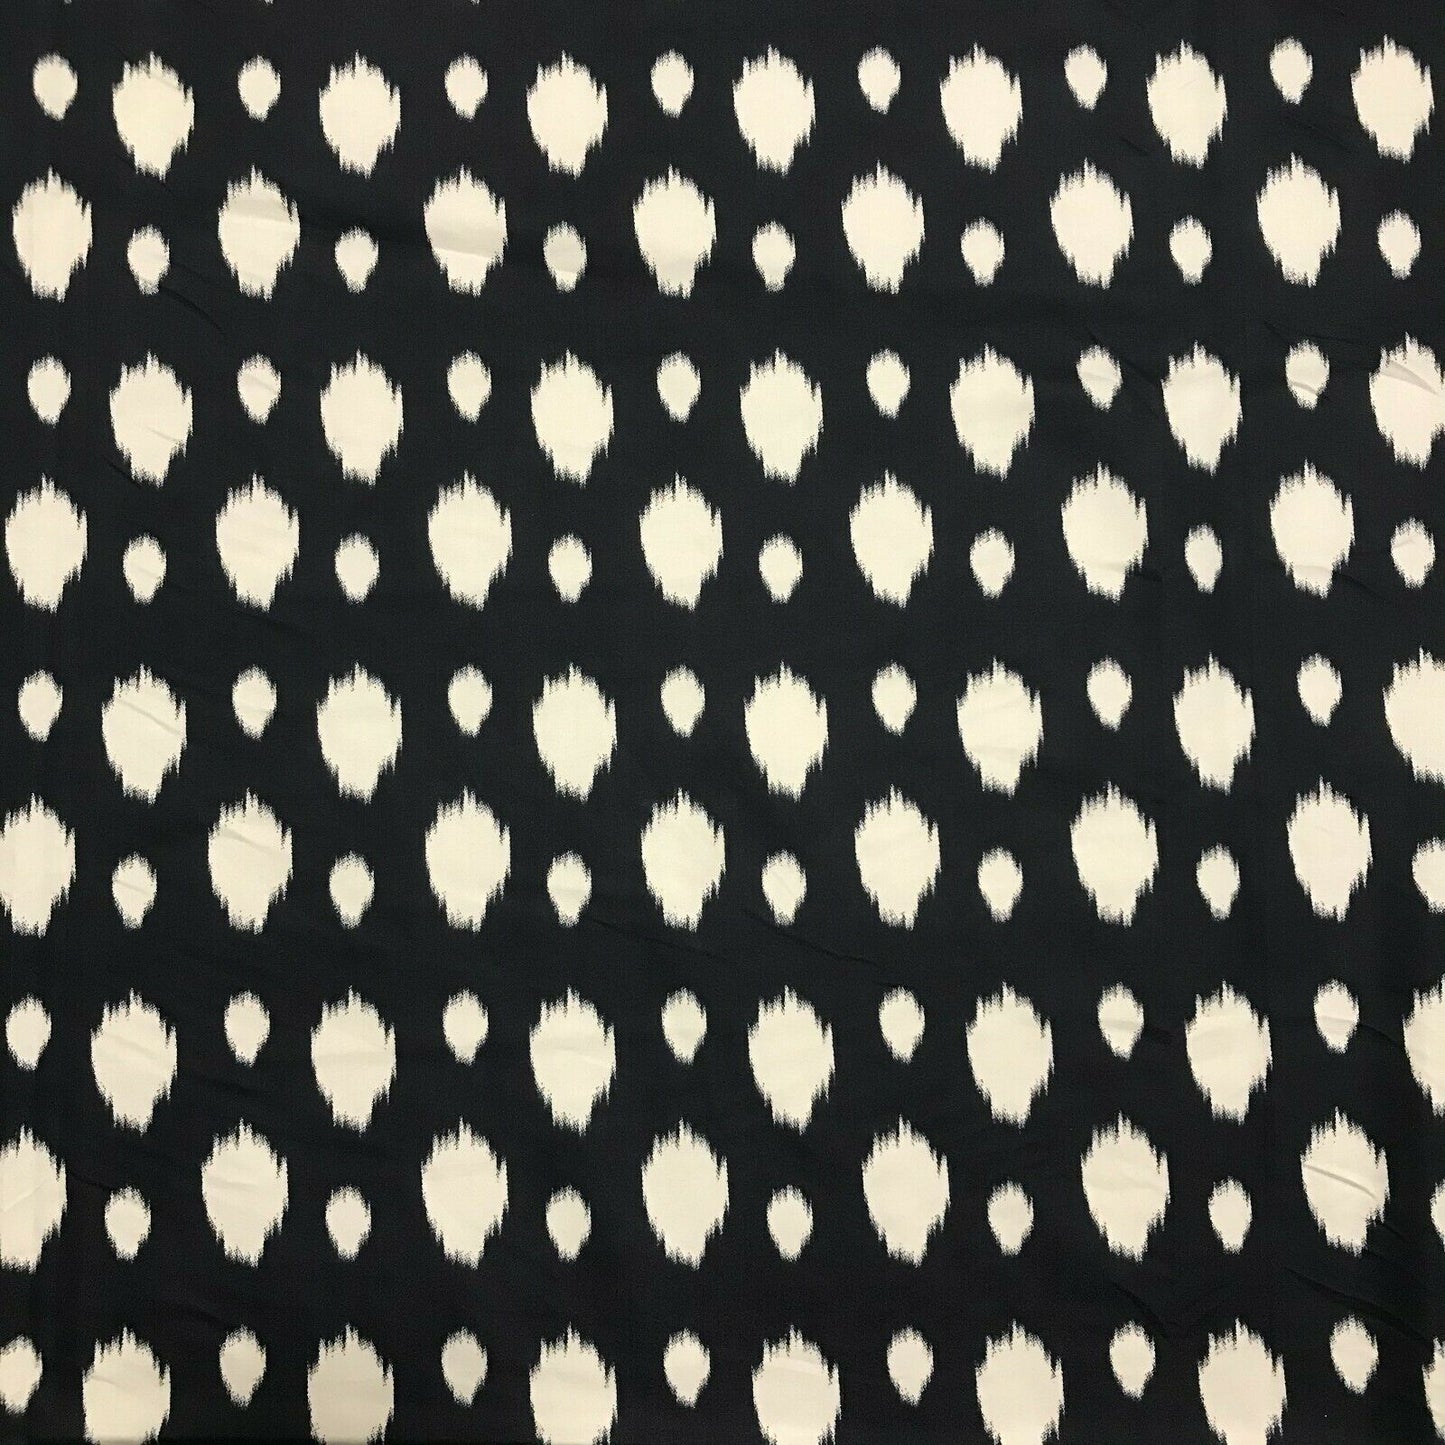 Cotton Blend Sateen Fabric Ikat Polka Dot Printed 51" Wide Sold By The Metre